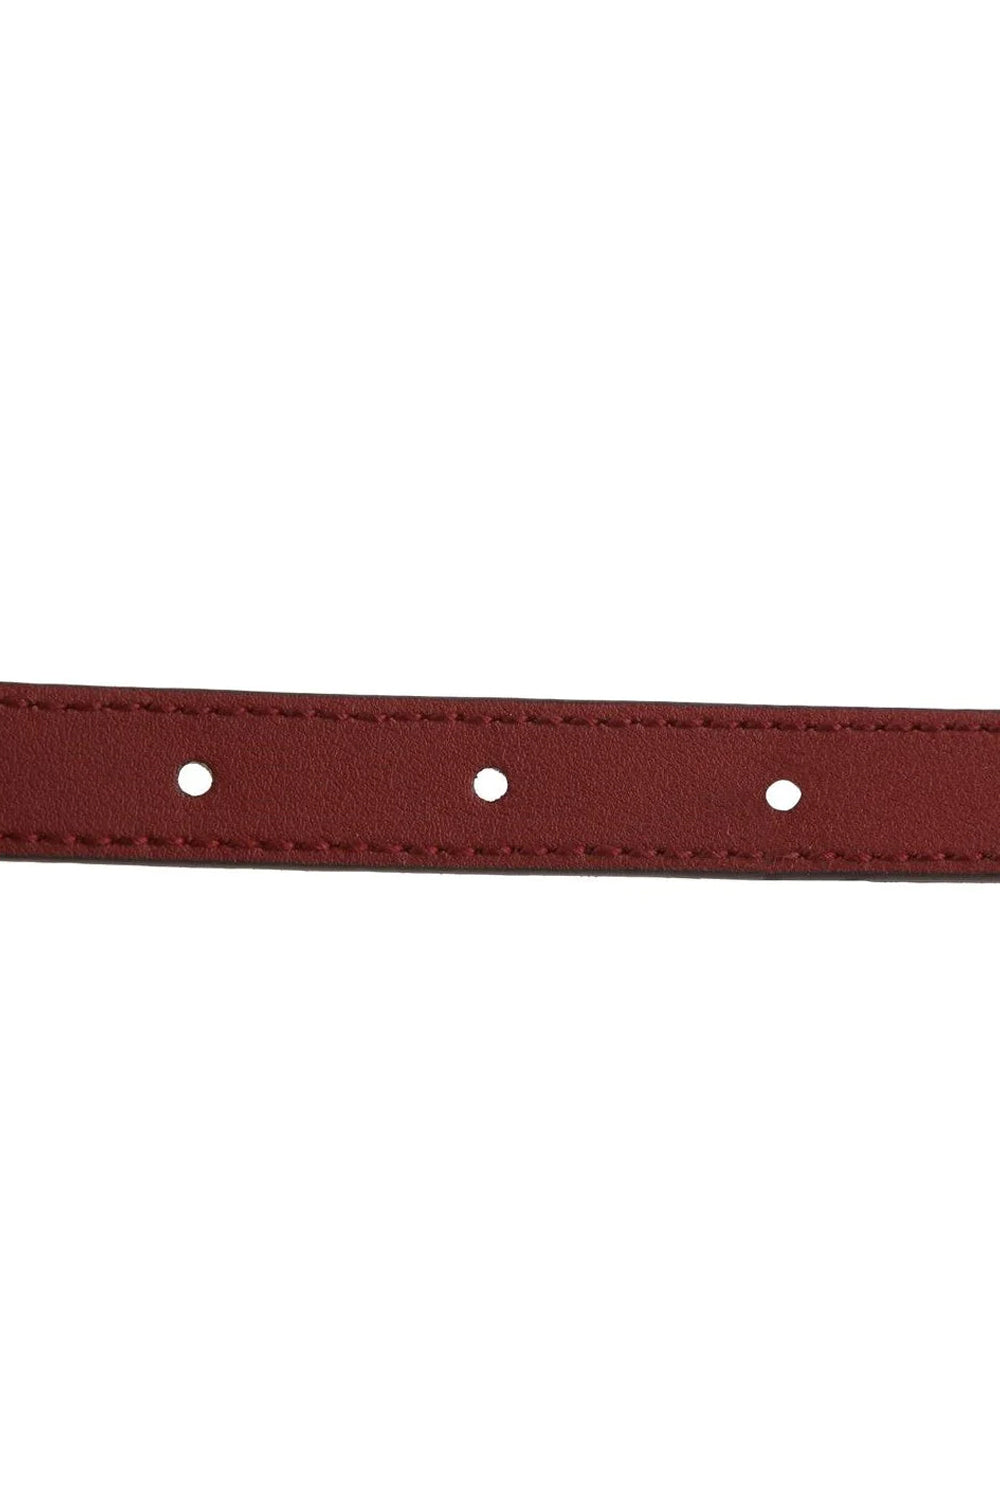 Gucci Marmont Red Suede Torchon GG Buckle Belt